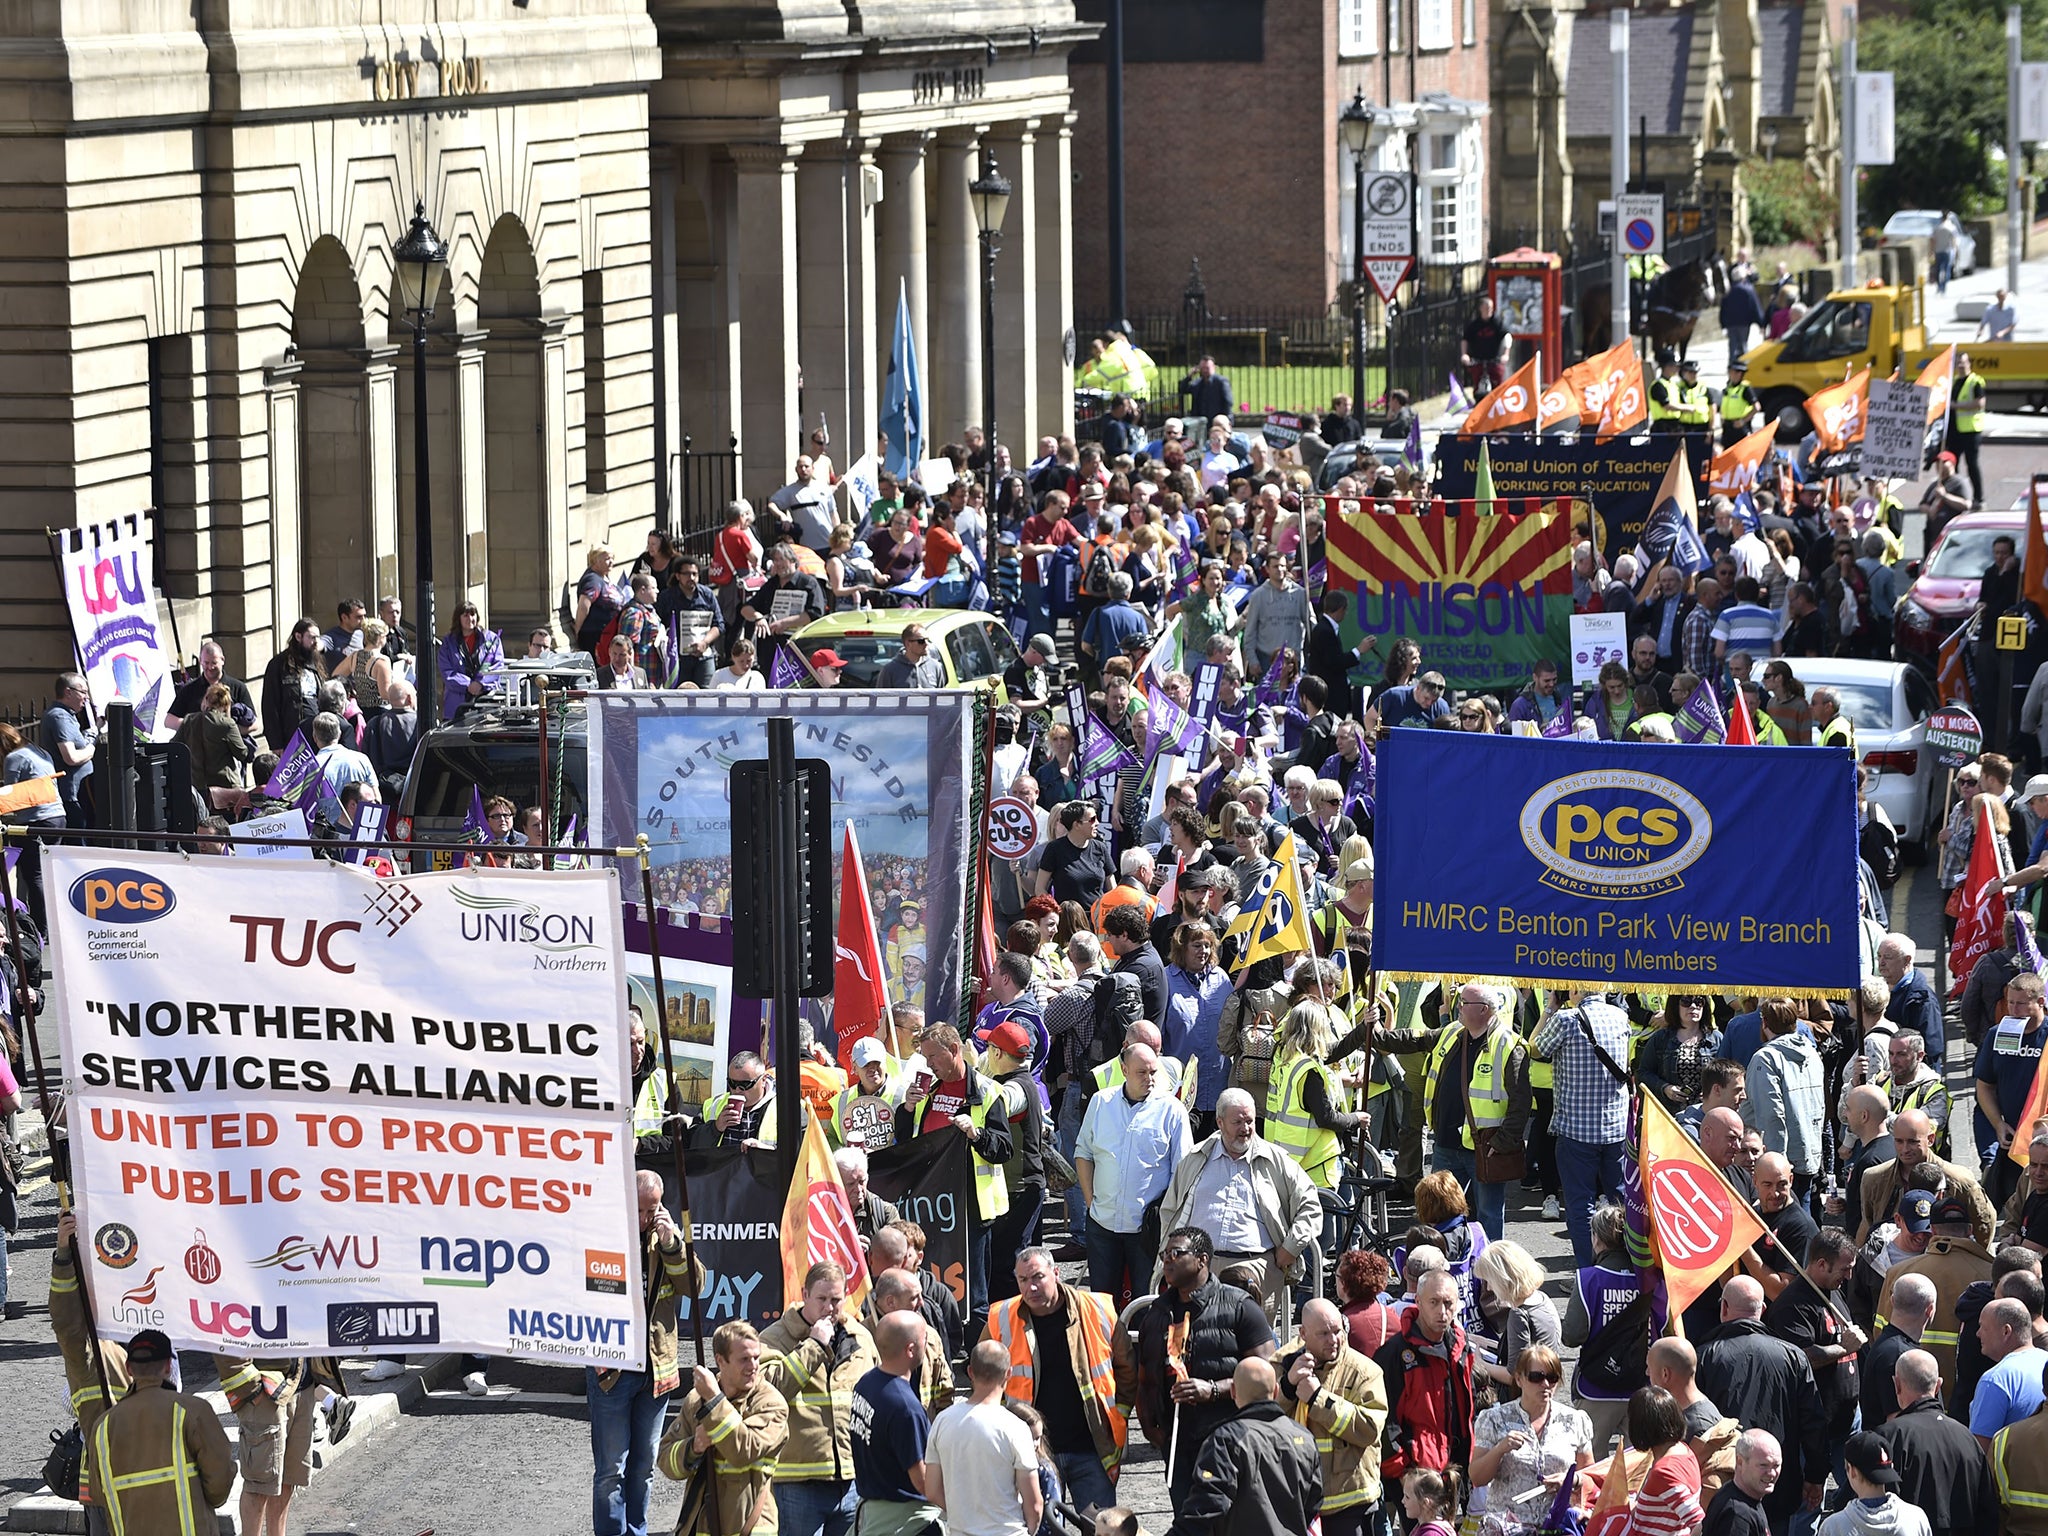 Public sector workers march through Newcastle city centre as they take part in the one-day walkout as part of bitter disputes over pay, pensions, jobs and spending cuts